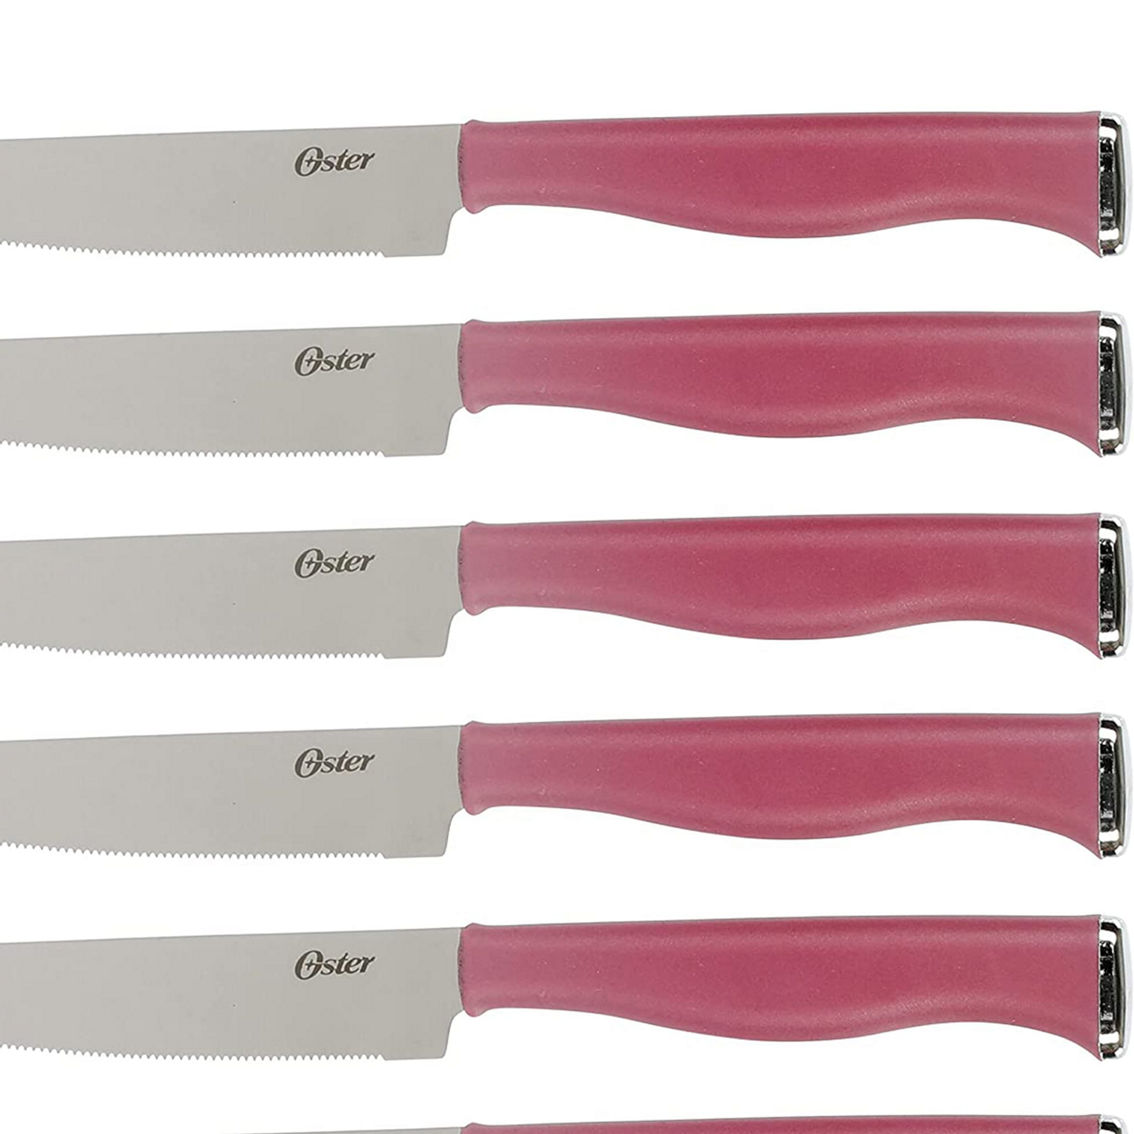 Oster Langmore 15 Piece Stainless Steel Blade Cutlery Set in Purple - Image 4 of 5